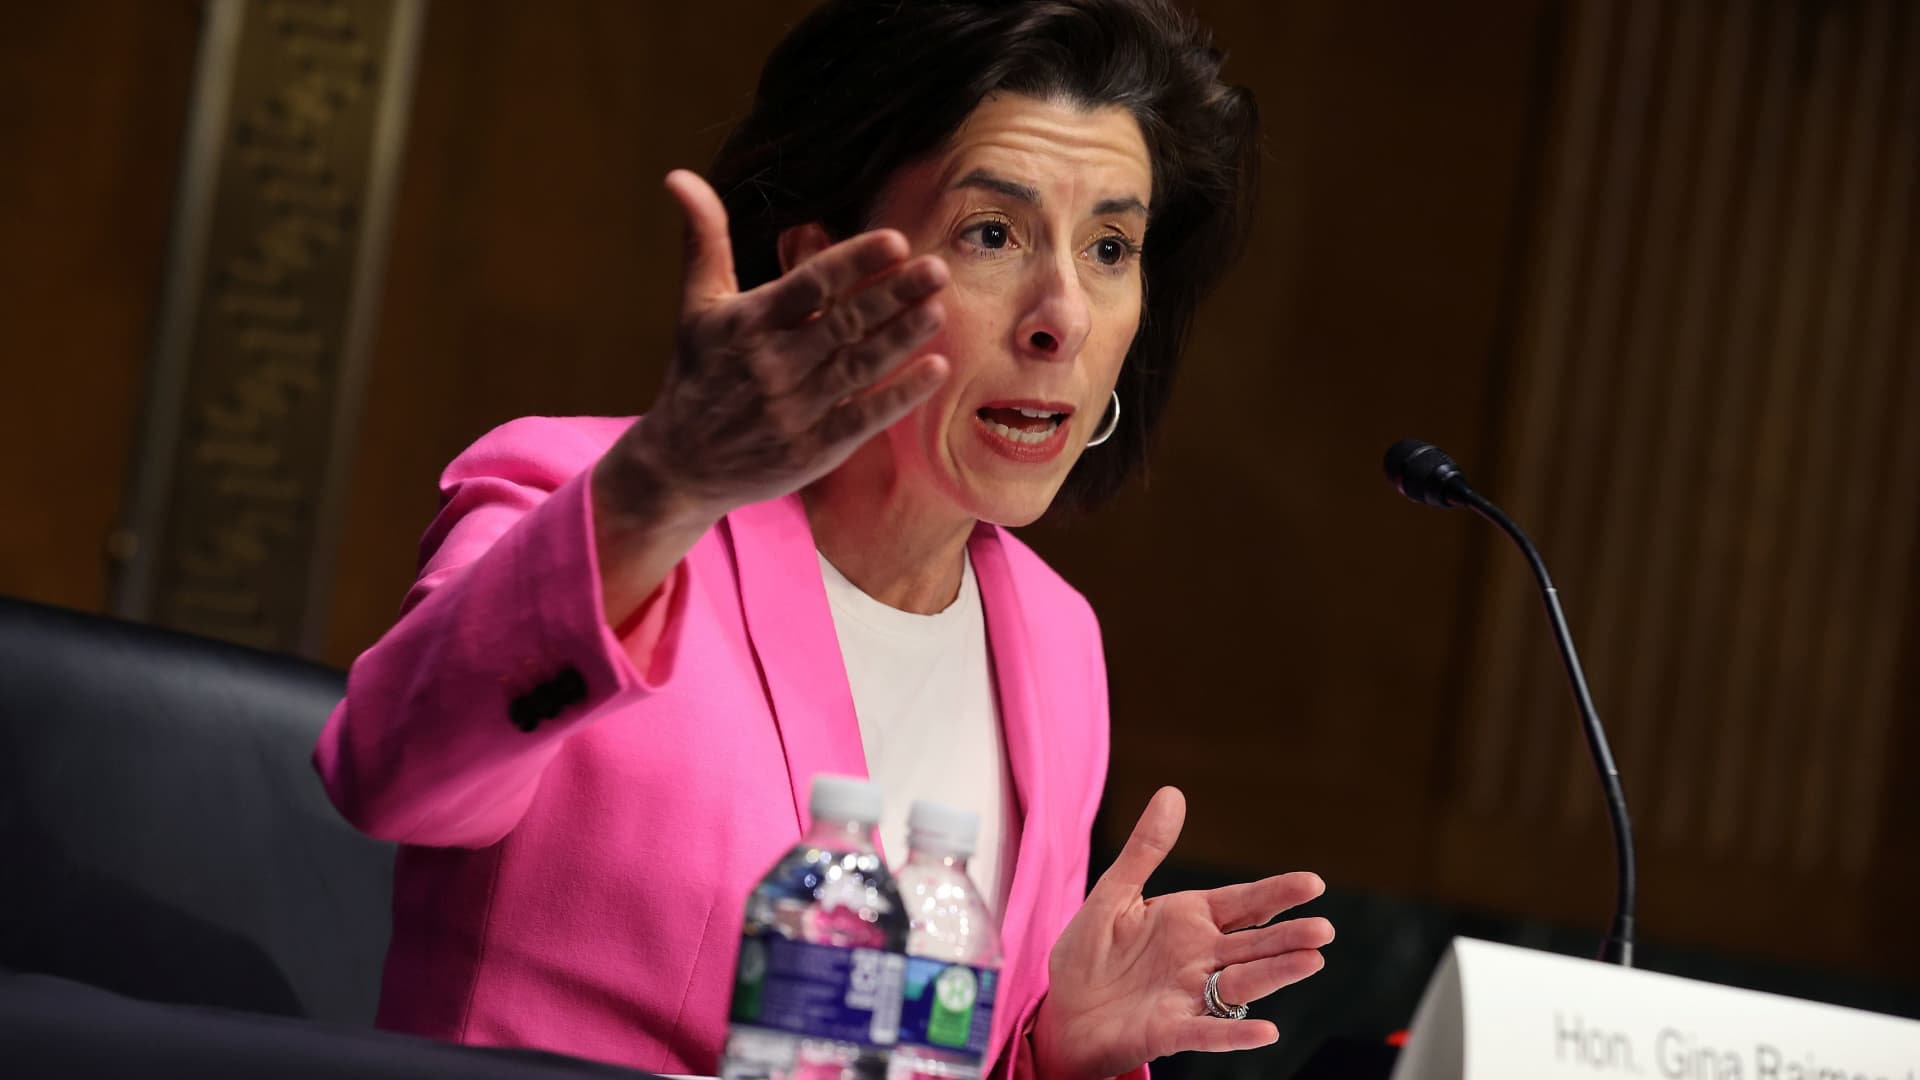 Commerce Secretary Gina Raimondo testifies before the Senate Appropriations Committee during a hearing in the Dirksen Senate Office Building on Capitol Hill in Washington, D.C., April 20, 2021.